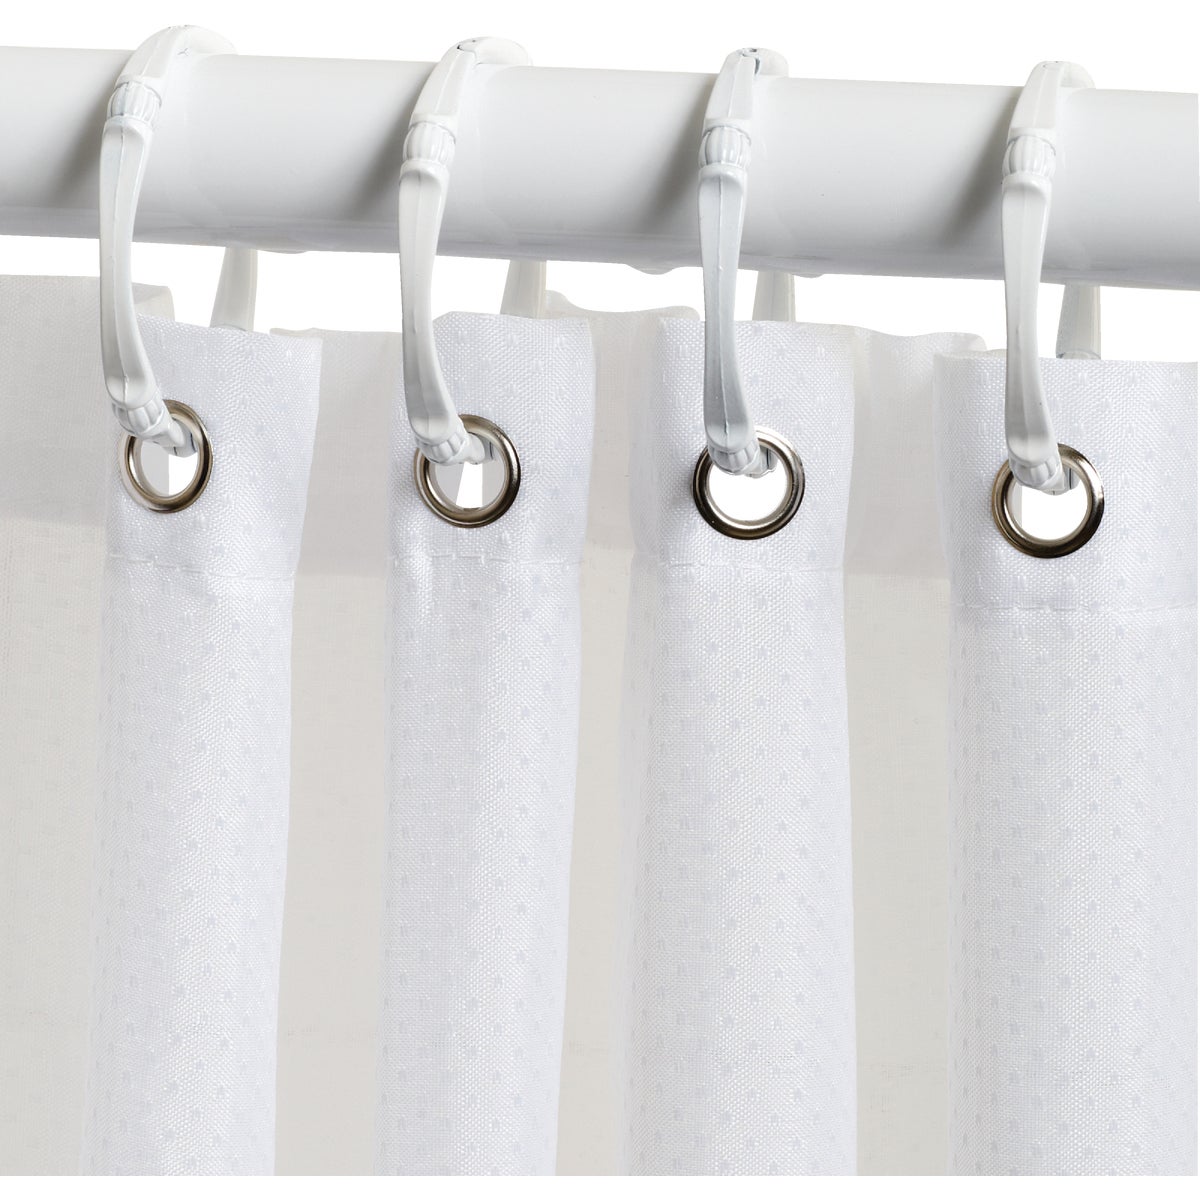 Item 428987, Commercial grade fabric shower curtain has increased durability, water 